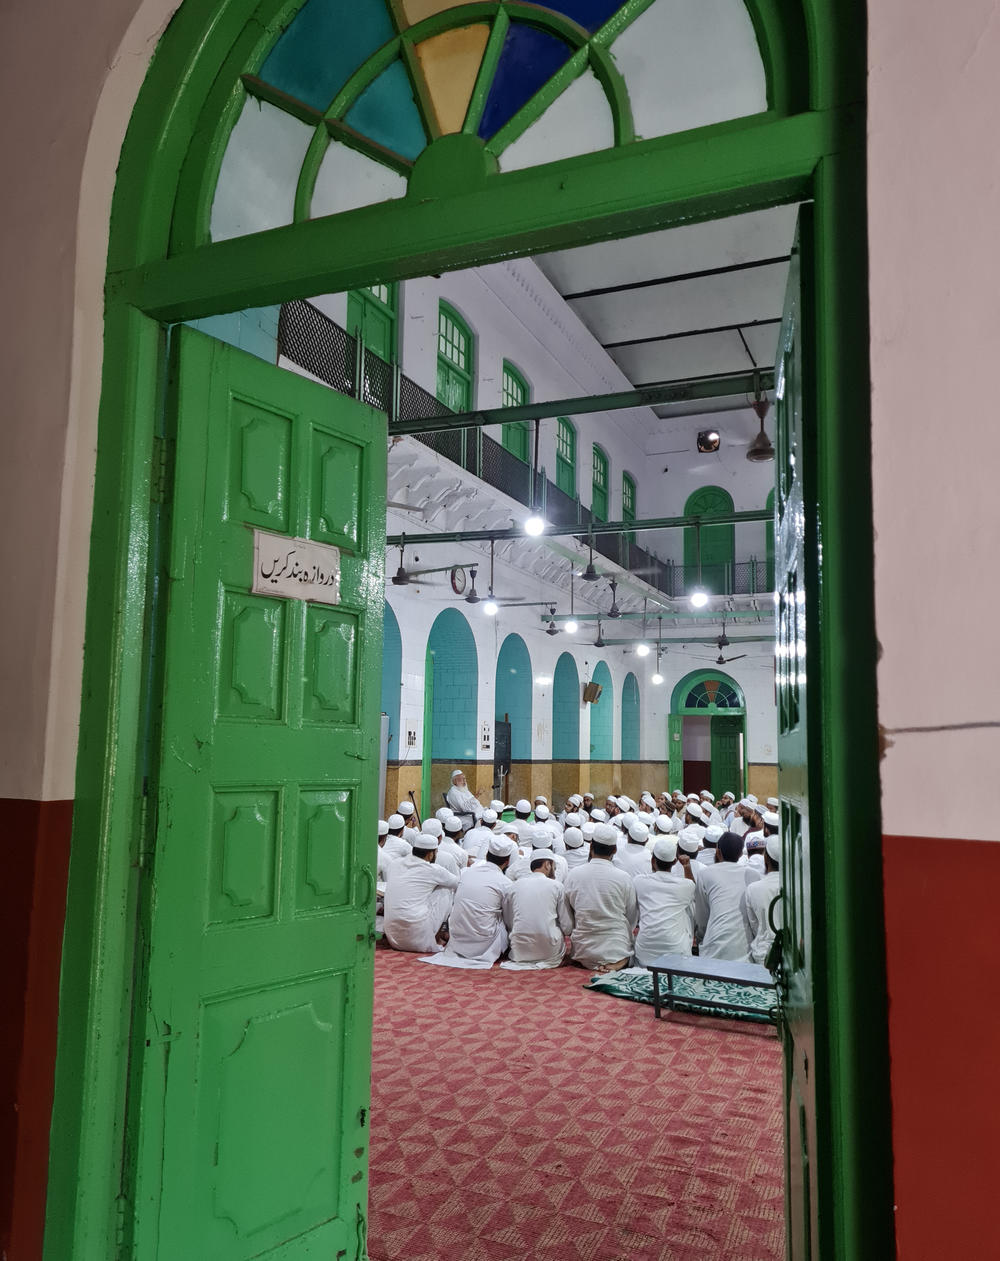 Classrooms on the campus of the Darul Uloom seminary in Deoband, India. This is where, in the 19th century, Muslim scholars founded the Deobandi school of Islam — which was later adopted by the Taliban.